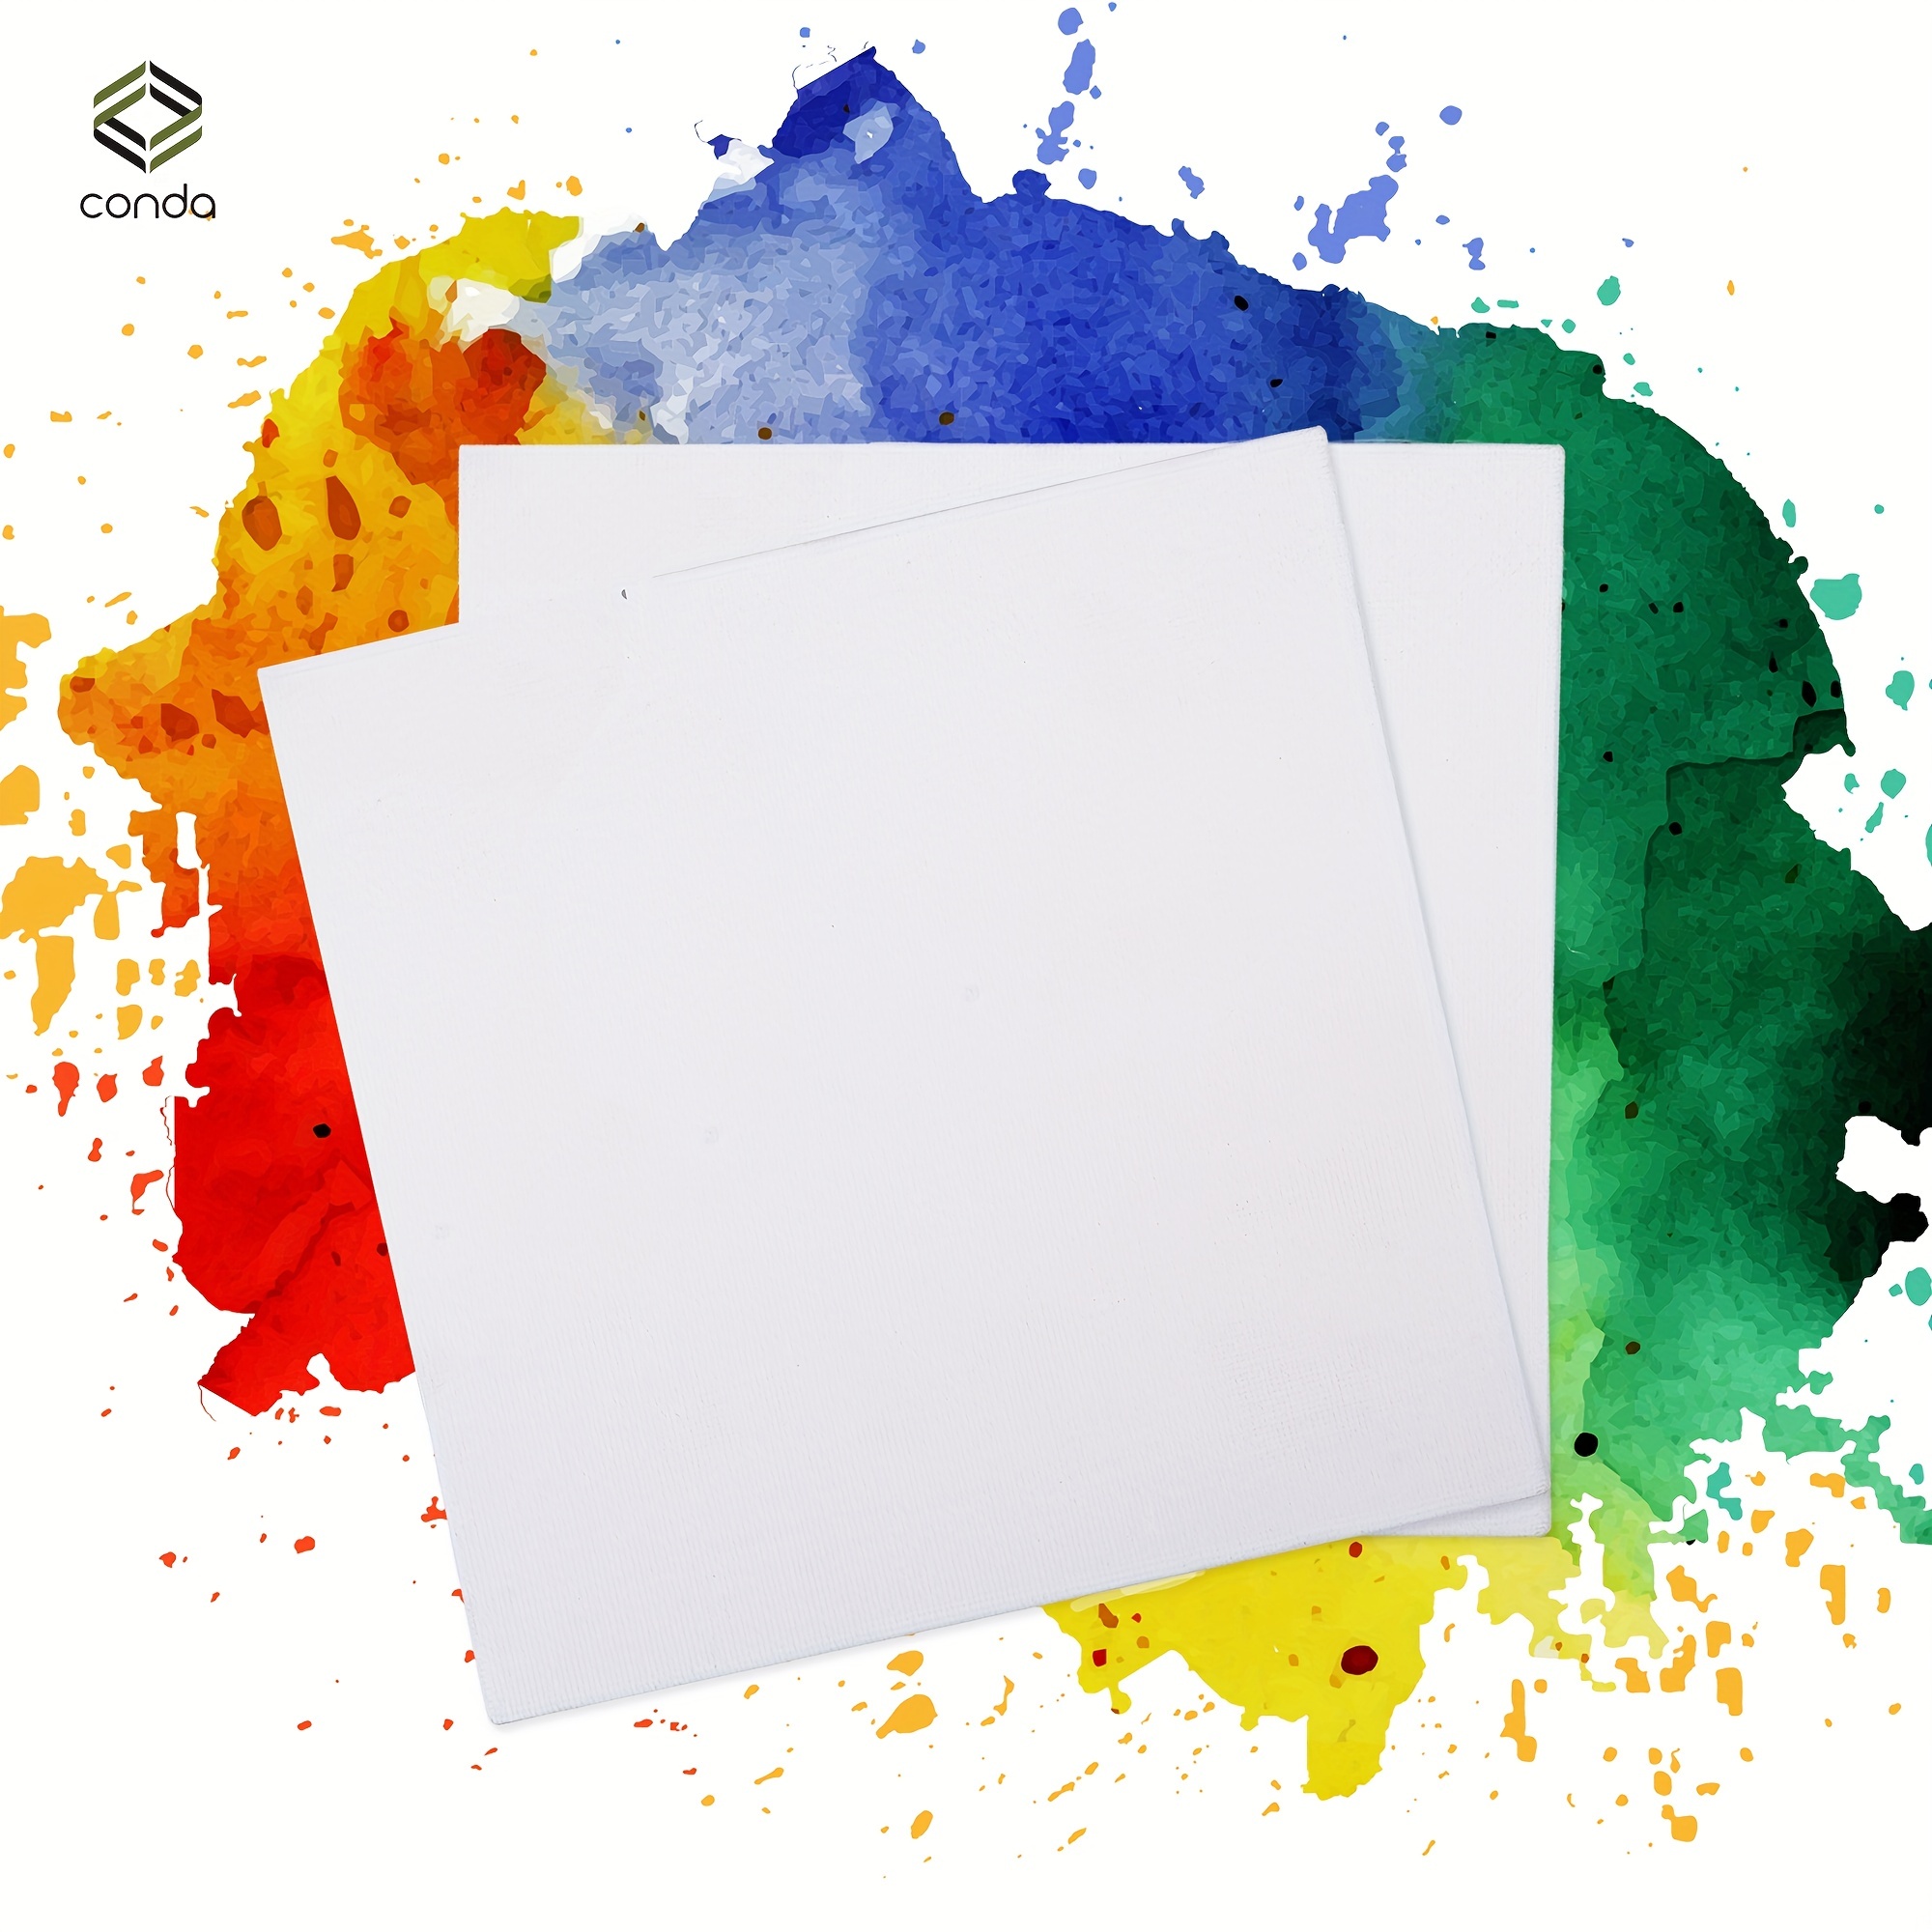  conda 8x10 inch Stretched Canvas for Painting, Pack of 10, 100%  Cotton, 5/8 in Profile Blank Stretched Canvas Value Bulk Pack Art White  Canvas for Acrylics, Oils Painting